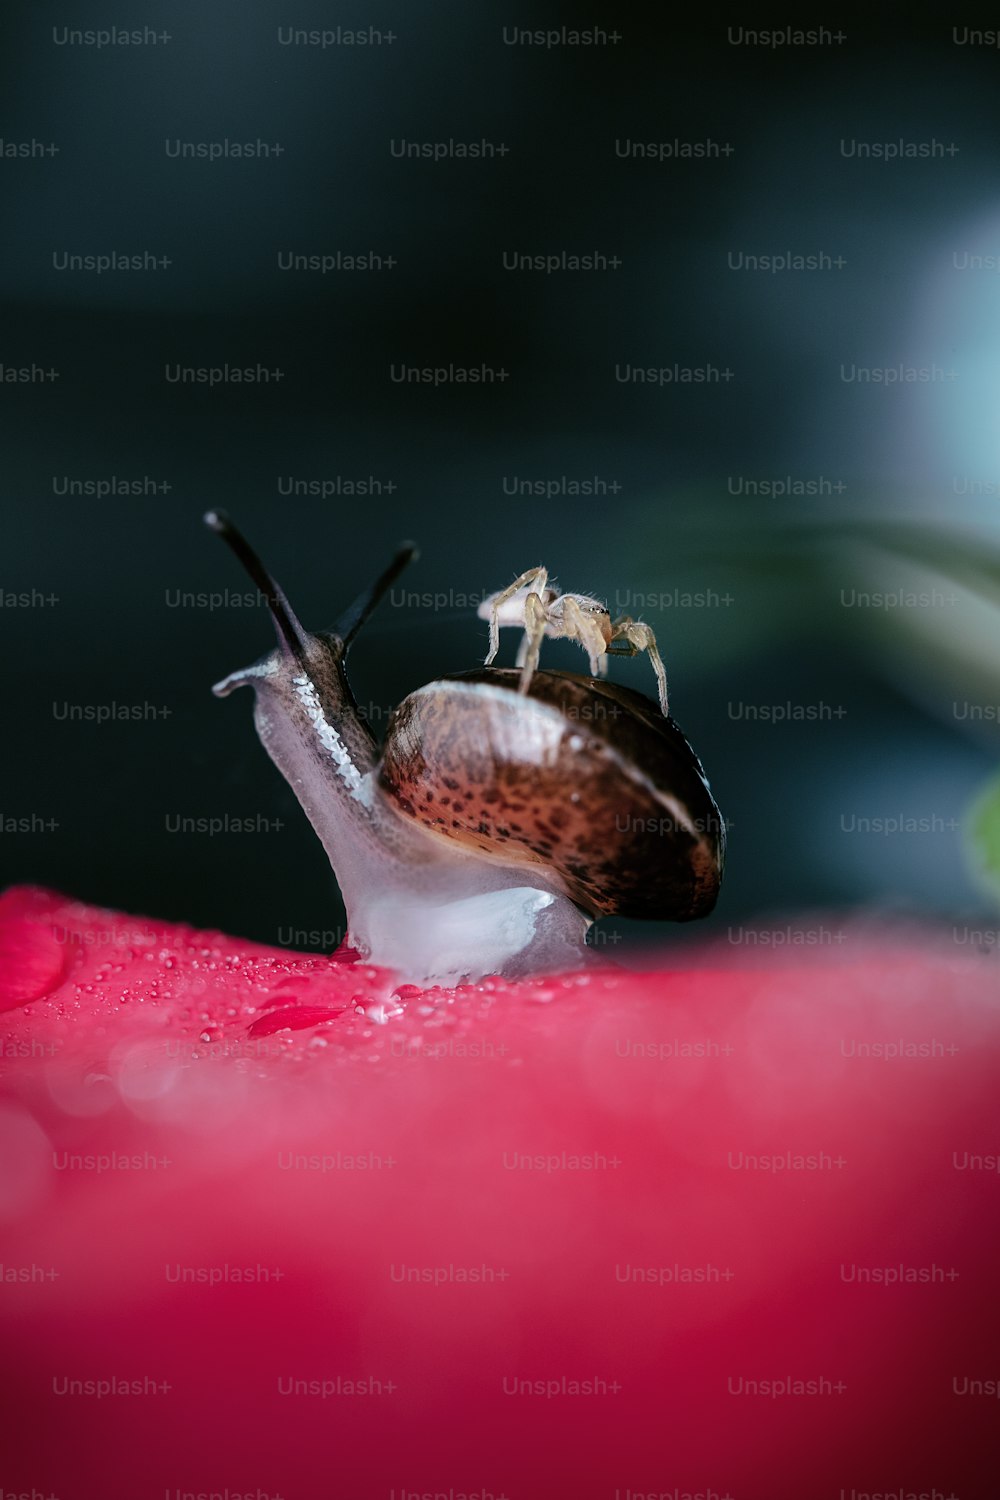 a close up of a snail on a pink flower